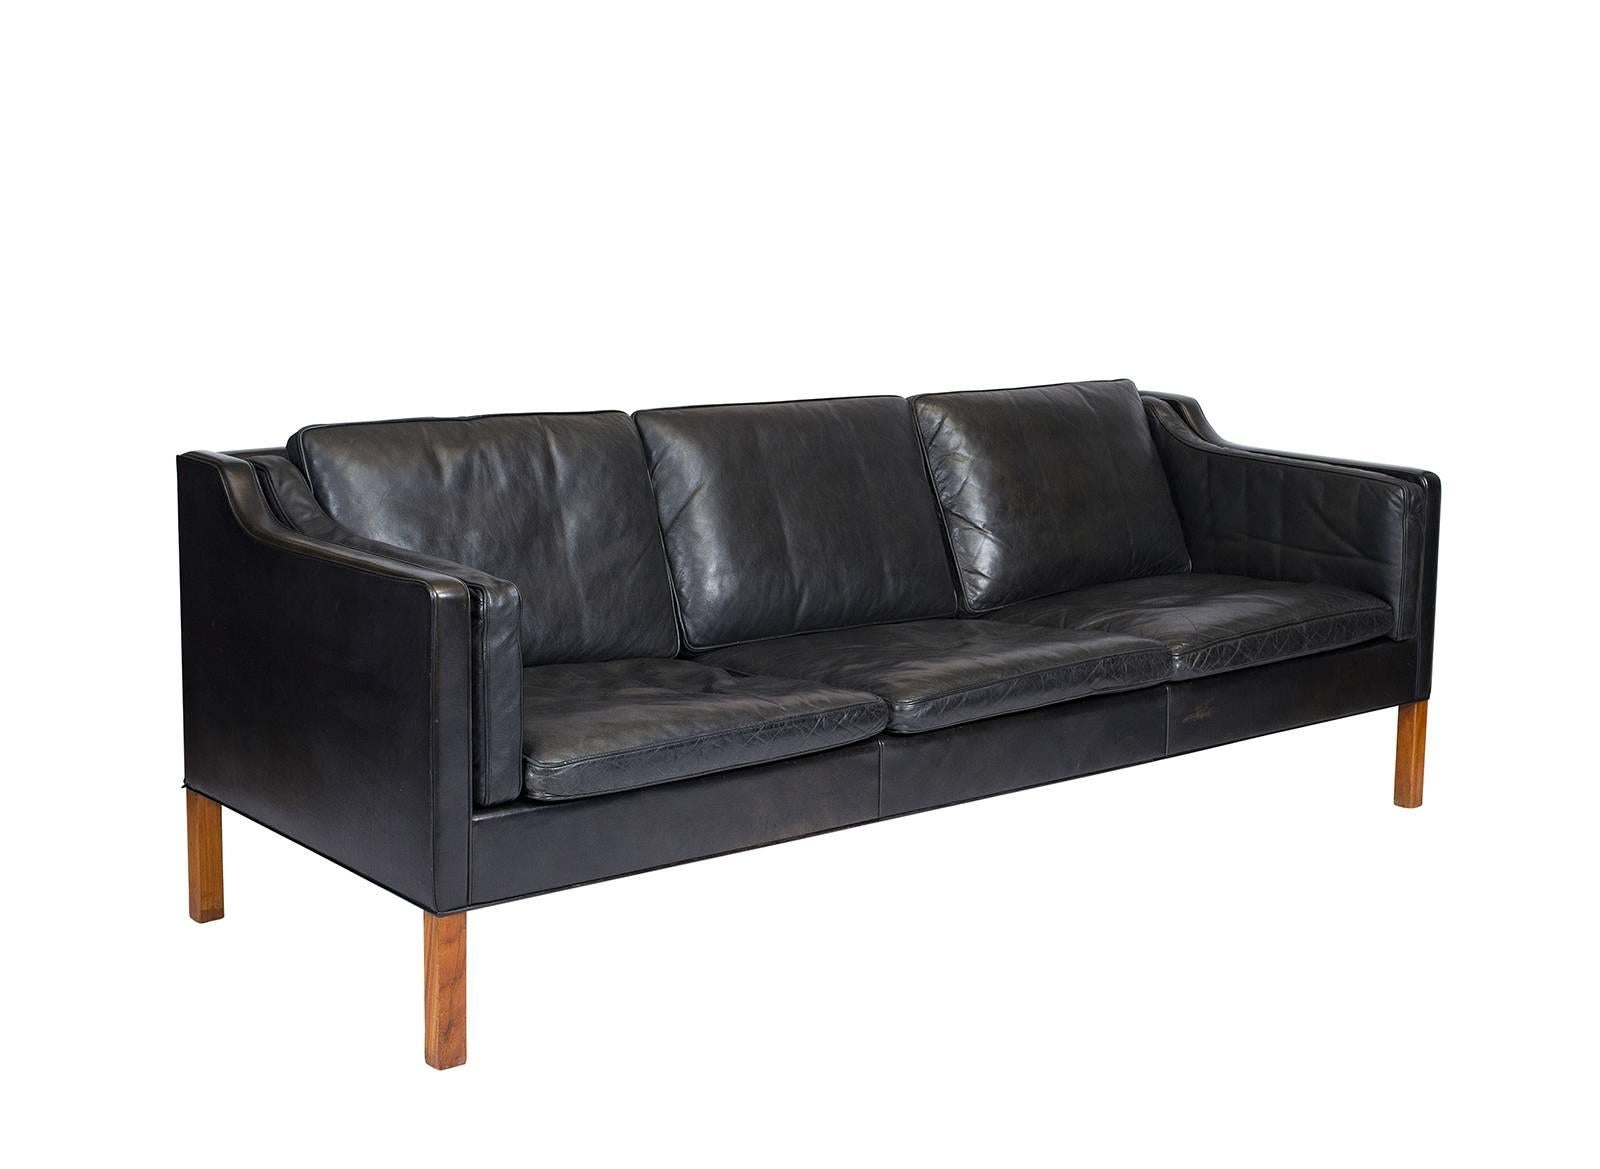 Børge Mogensen model #2213 three-seat leather sofa designed in 1962 and produced by Fredericia.     Store formerly known as ARTFUL DODGER INC